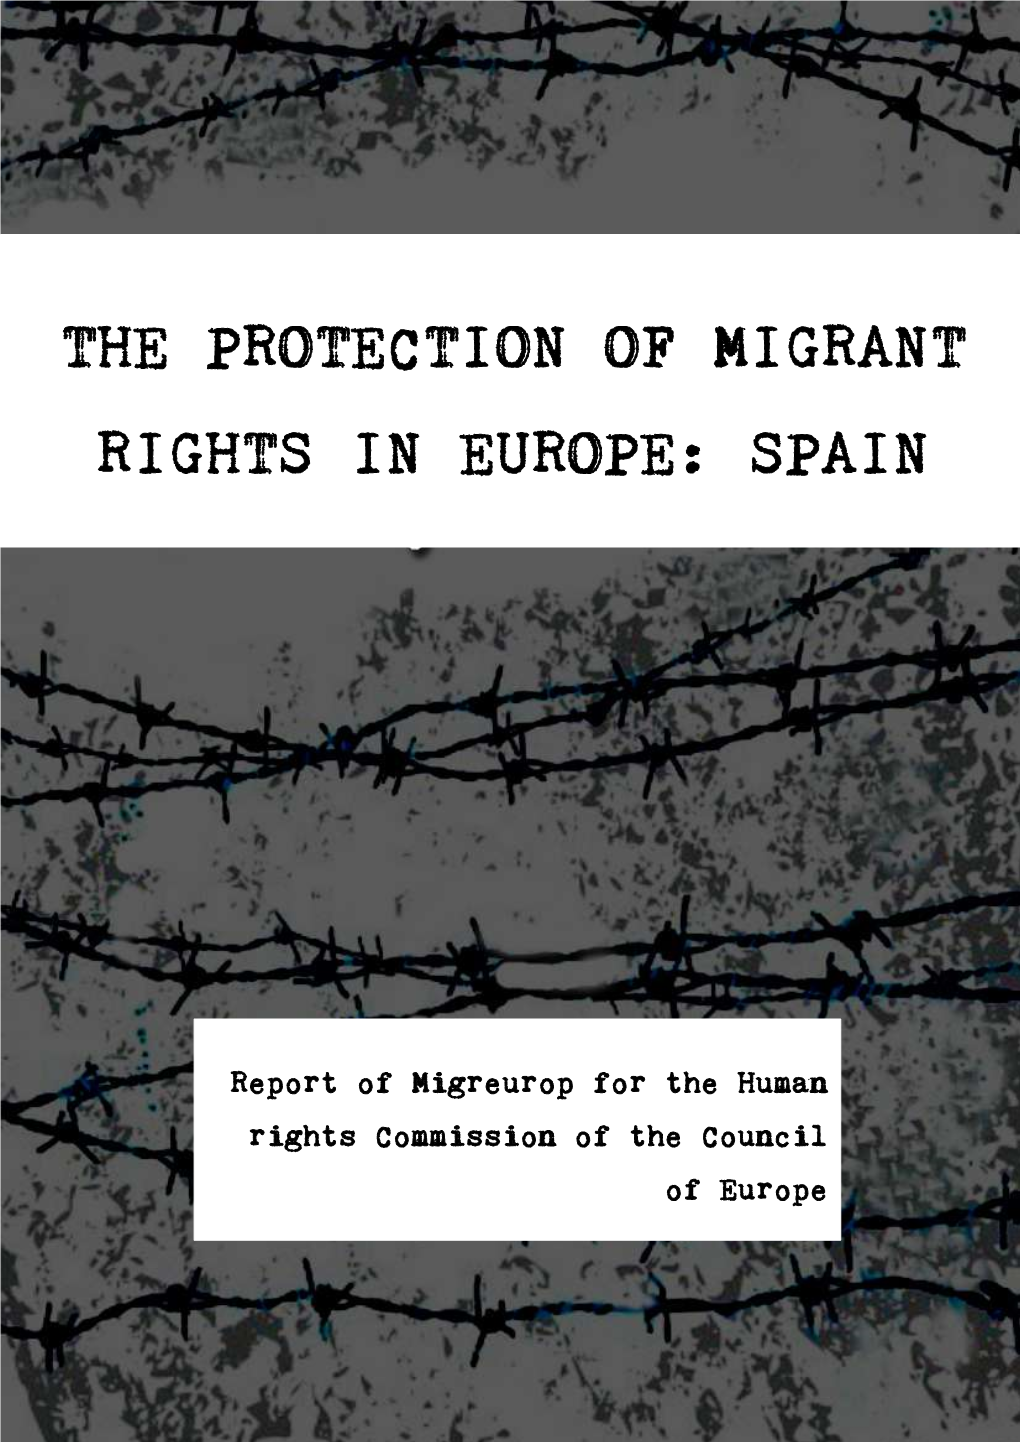 The Protection of Migrant Rights in Europe: Spain